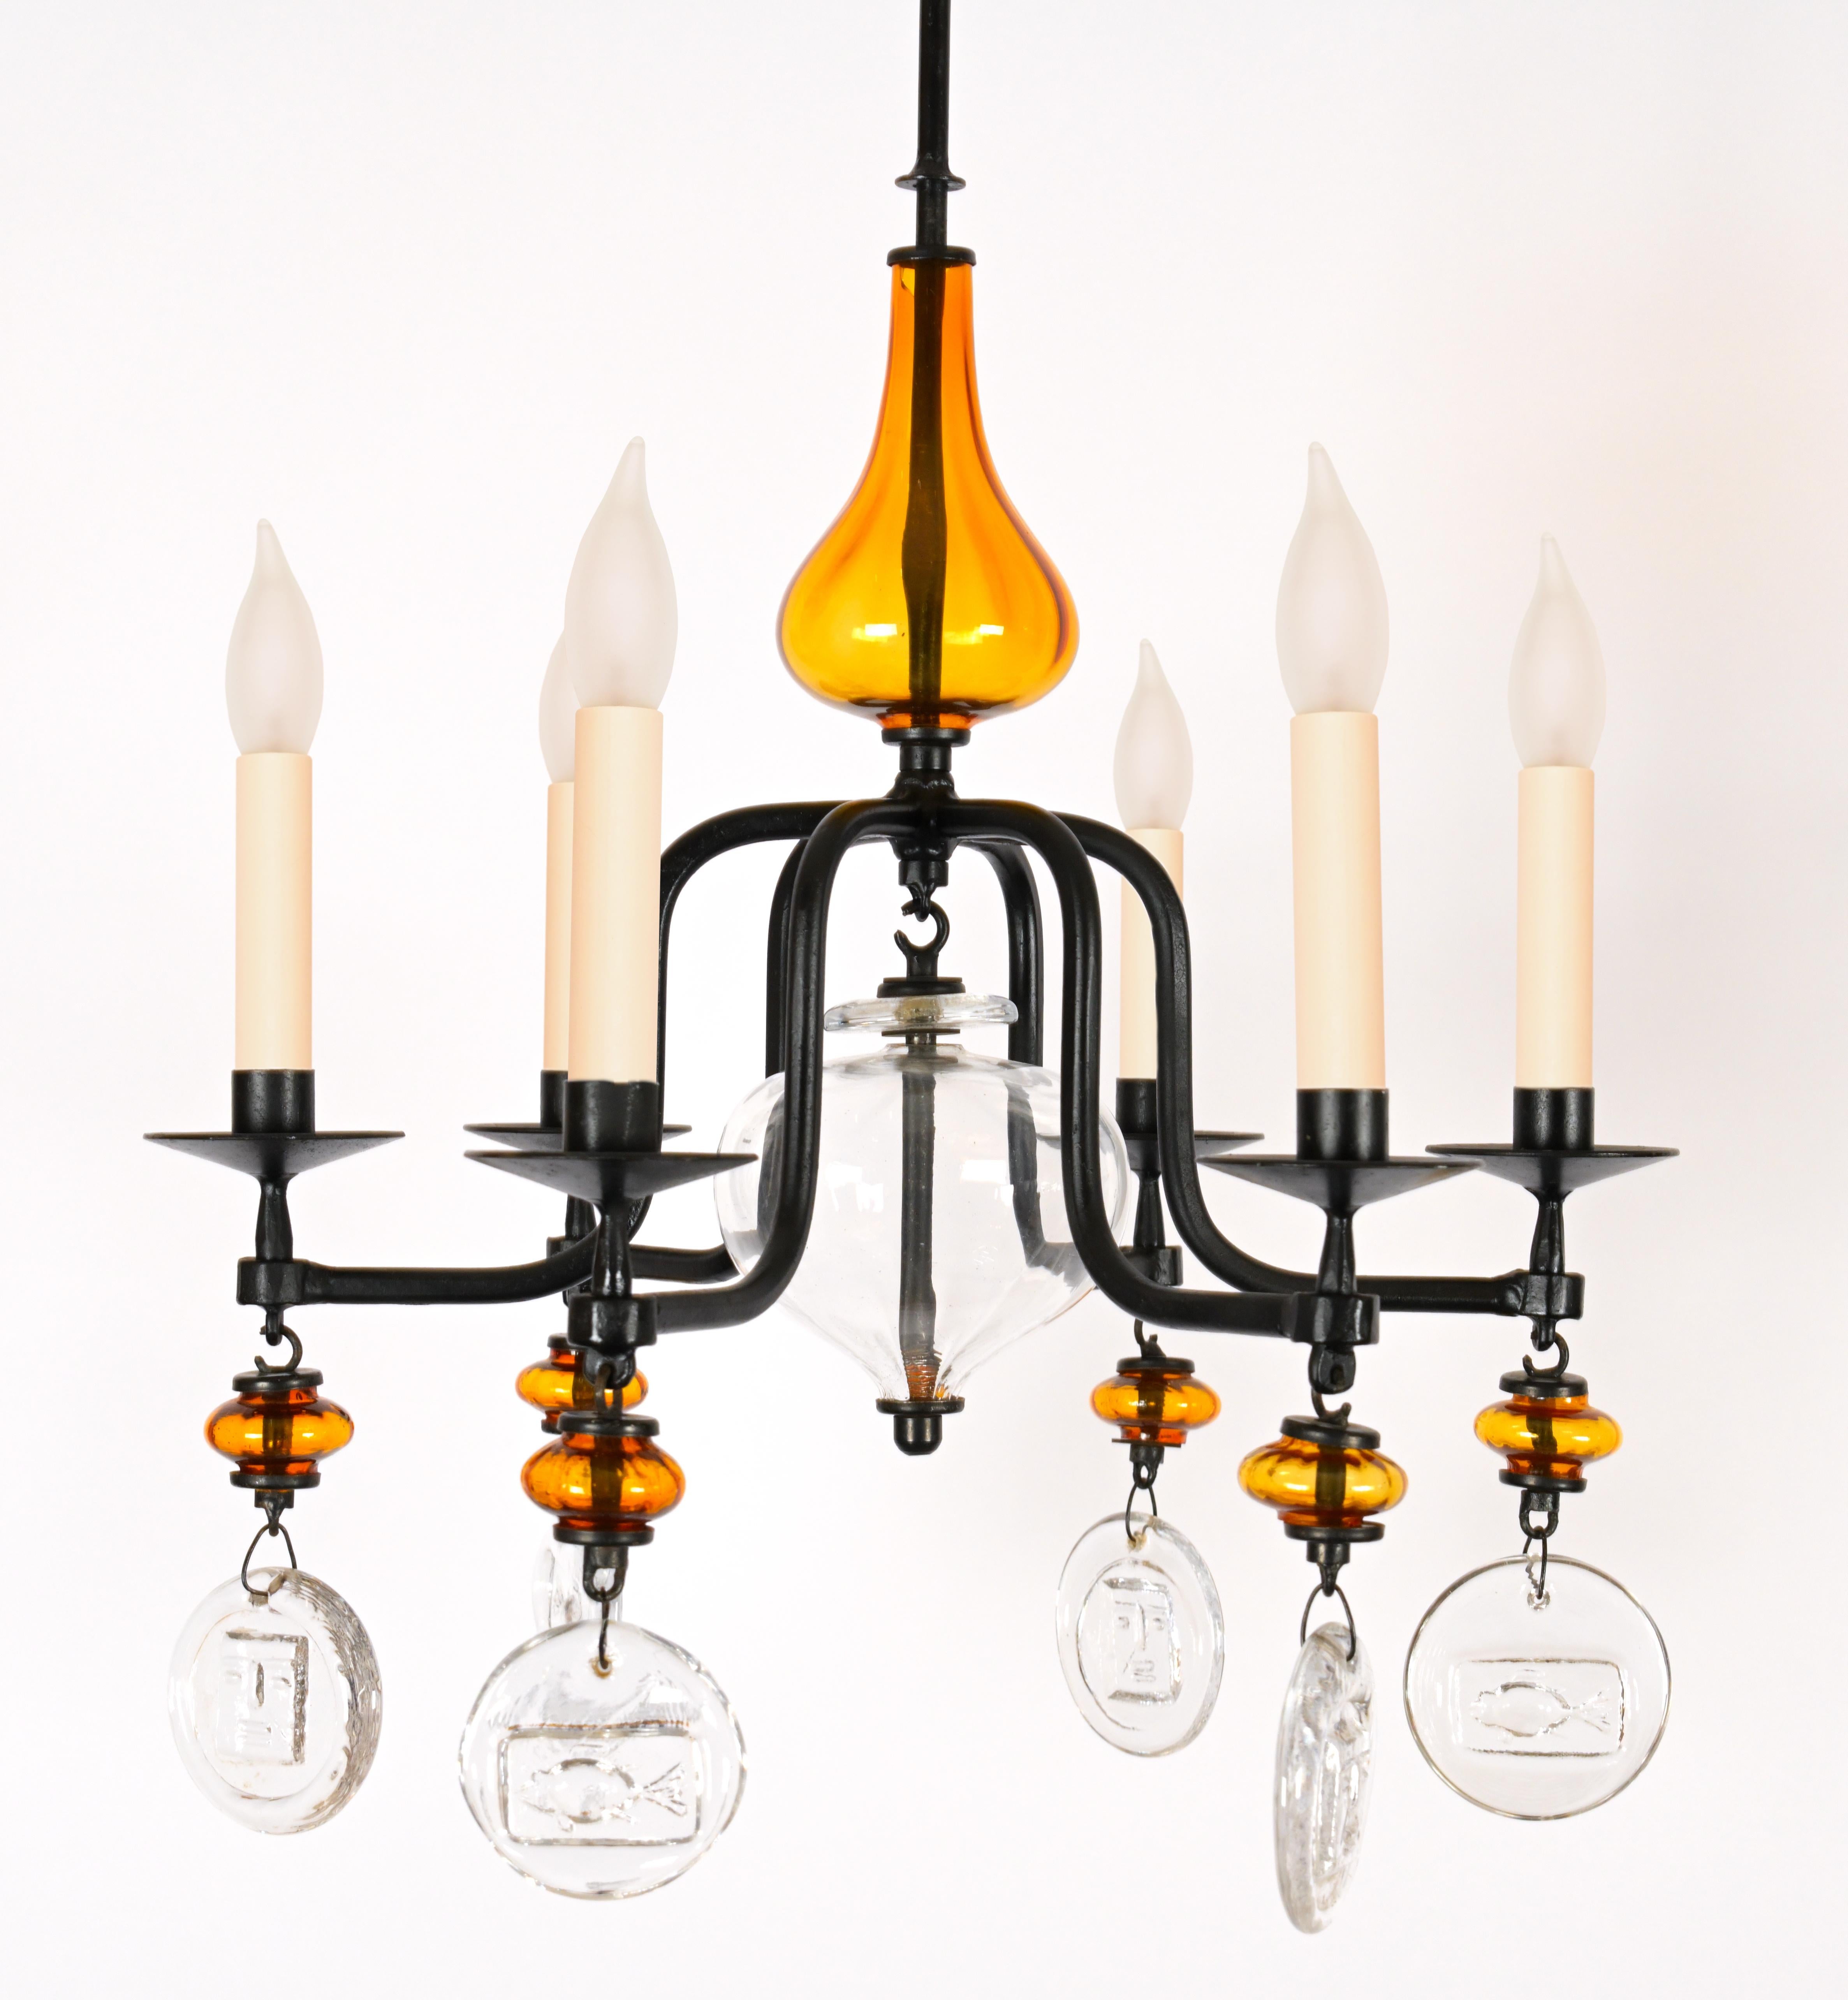 A glass and iron chandelier by Swedish Designer Erik Hoglund (1932-1998) having a bulbous orange blown glass center with 6 curved arms decorated with circular glass chips with imprints of playful faces and symbols. Includes standard wiring.